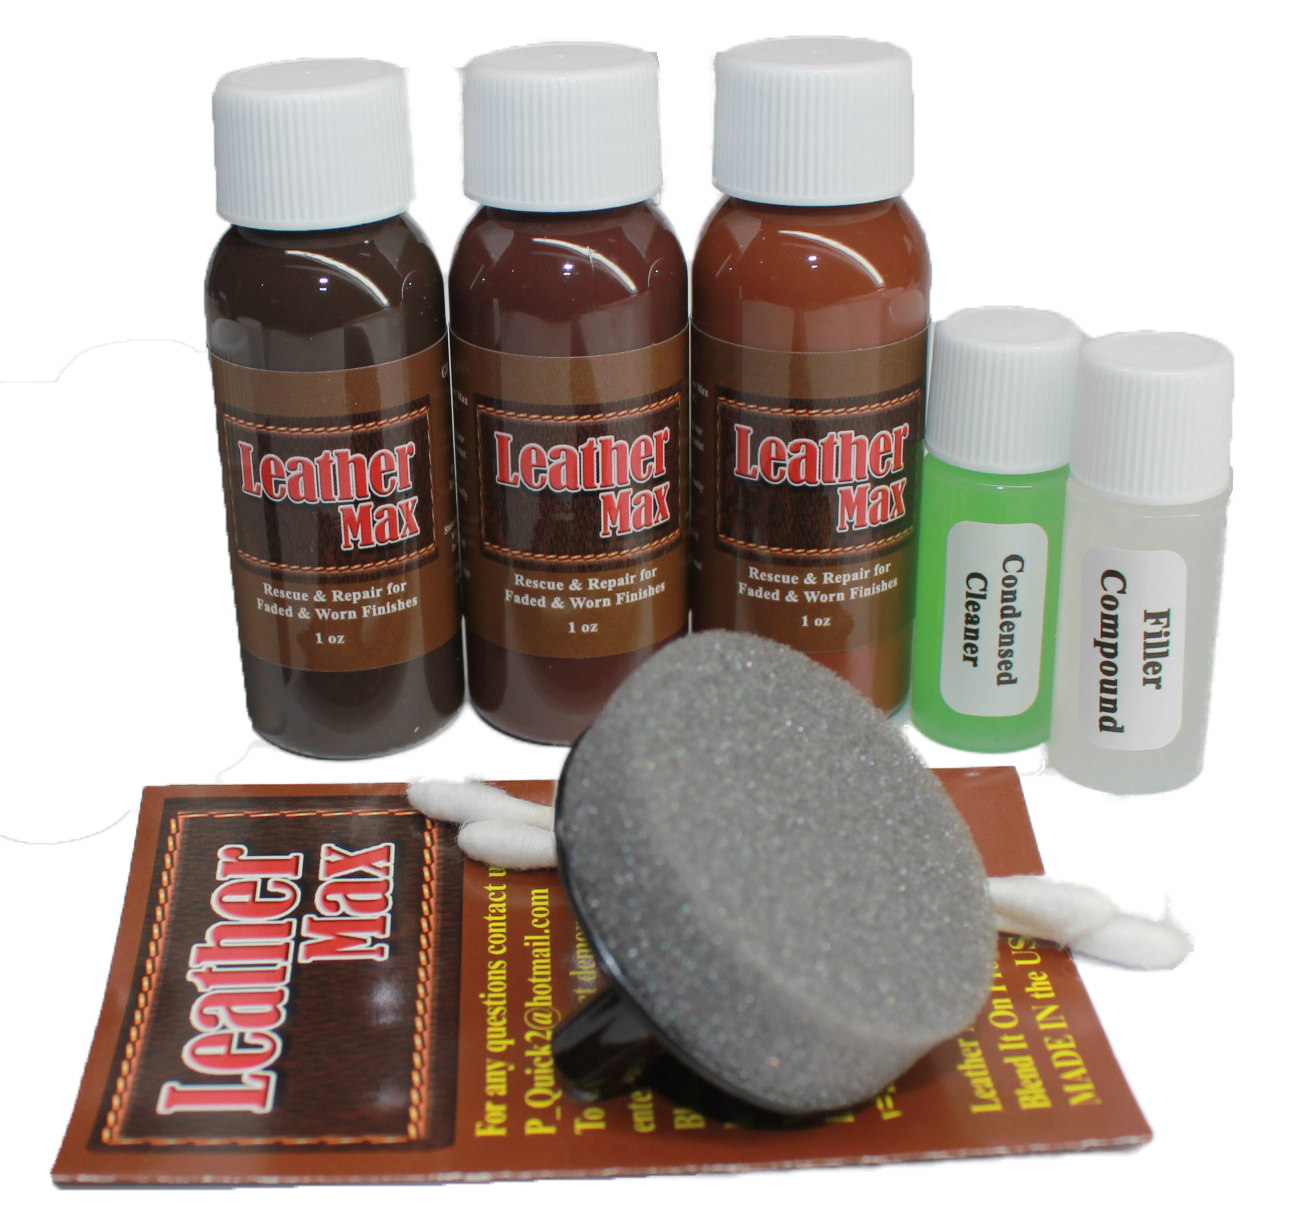 Leather Repair and Refinish for Handbags / Shoes / Boots / Jackets / Leather Max (Tan Mix) - image 1 of 7